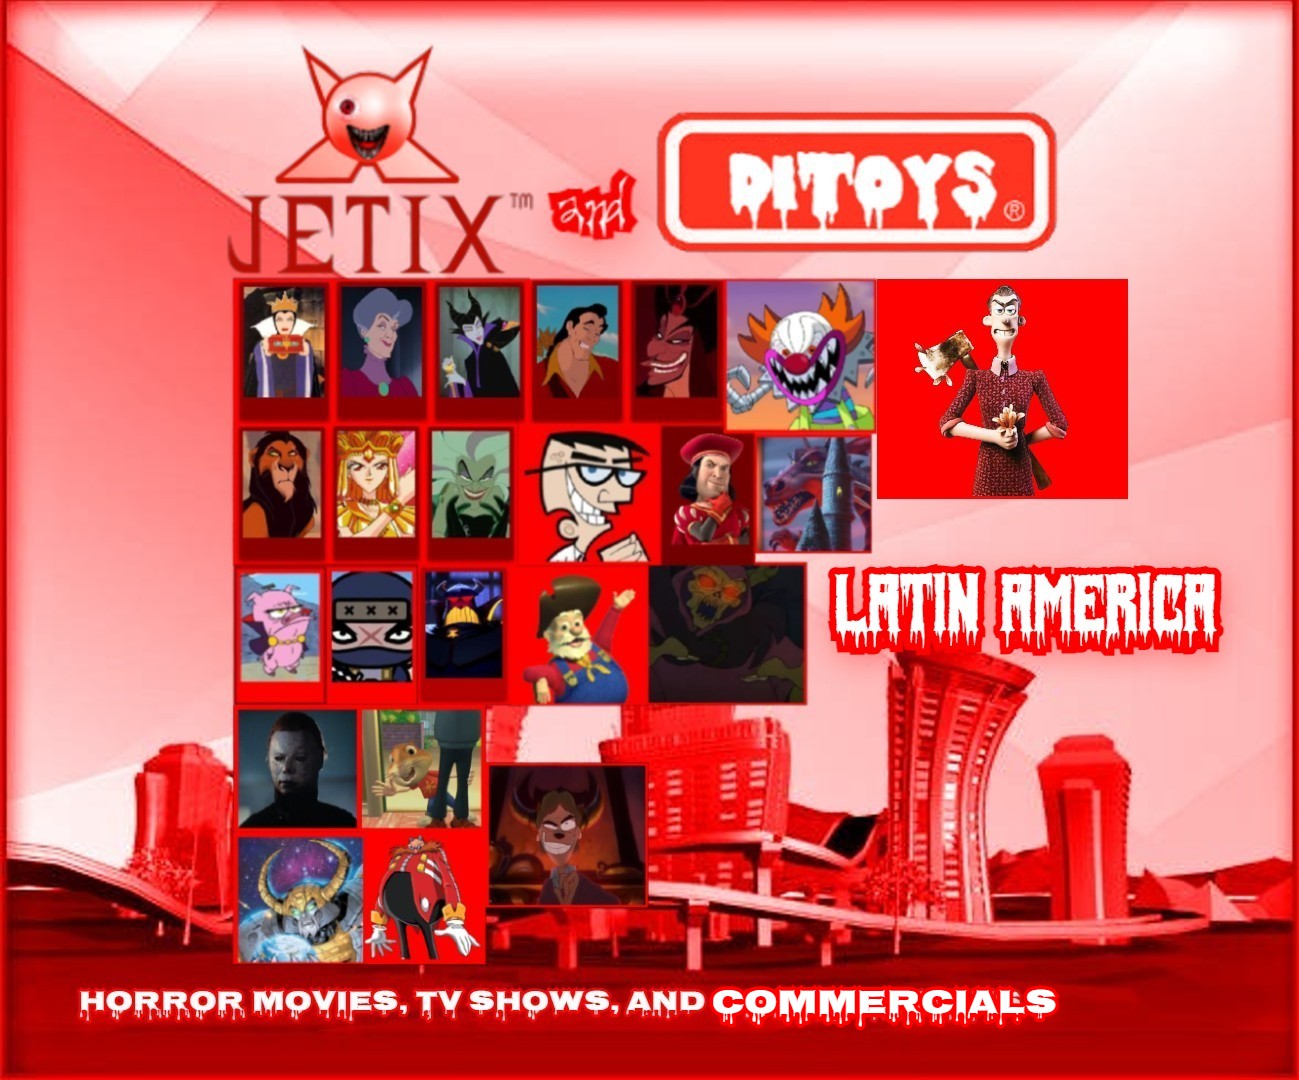 Jetix, Ditoys Horror Movies, TV Shows and Commercials Villains Blank Meme Template